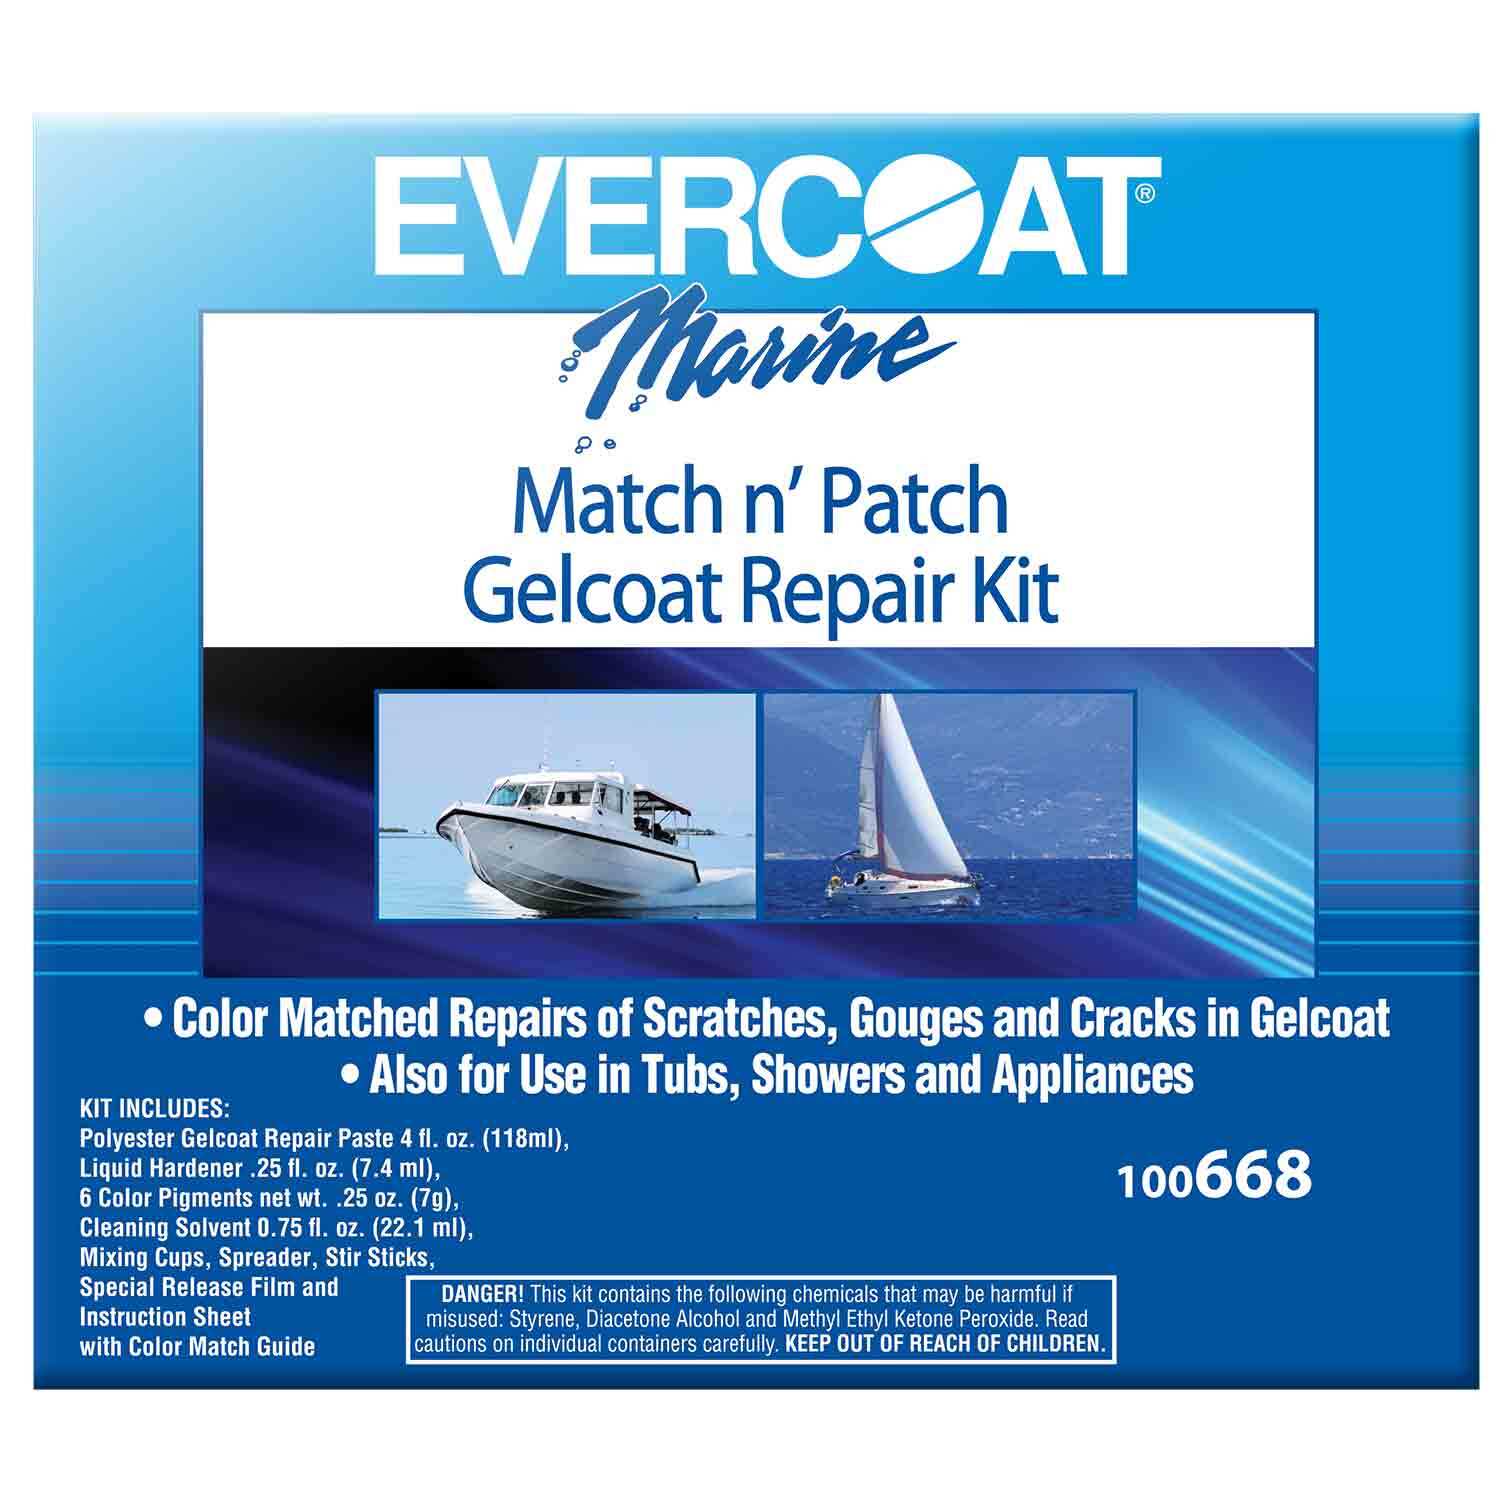 Patch match. Sea line Gelcoat Filler. Evercoat. Patch matching.